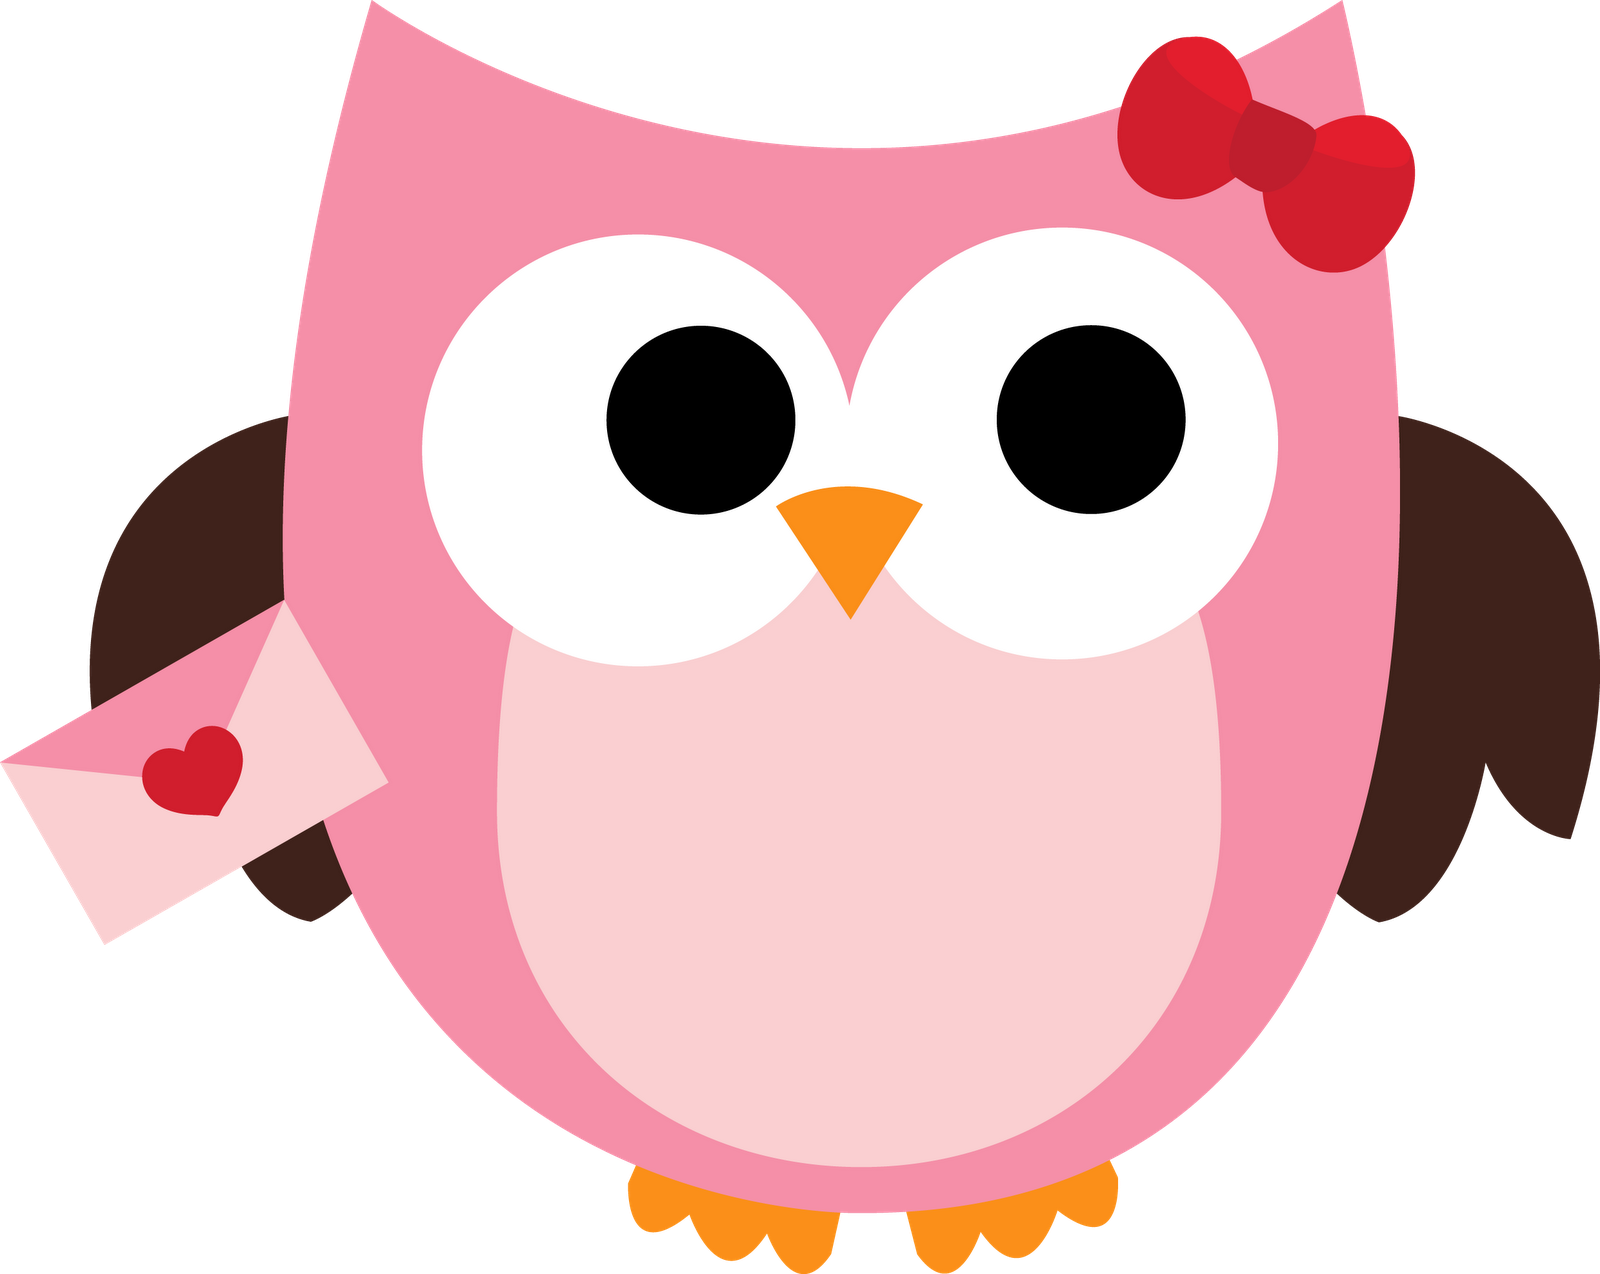 Owl Clip Cake Ideas and Designs - ClipArt Best - ClipArt Best